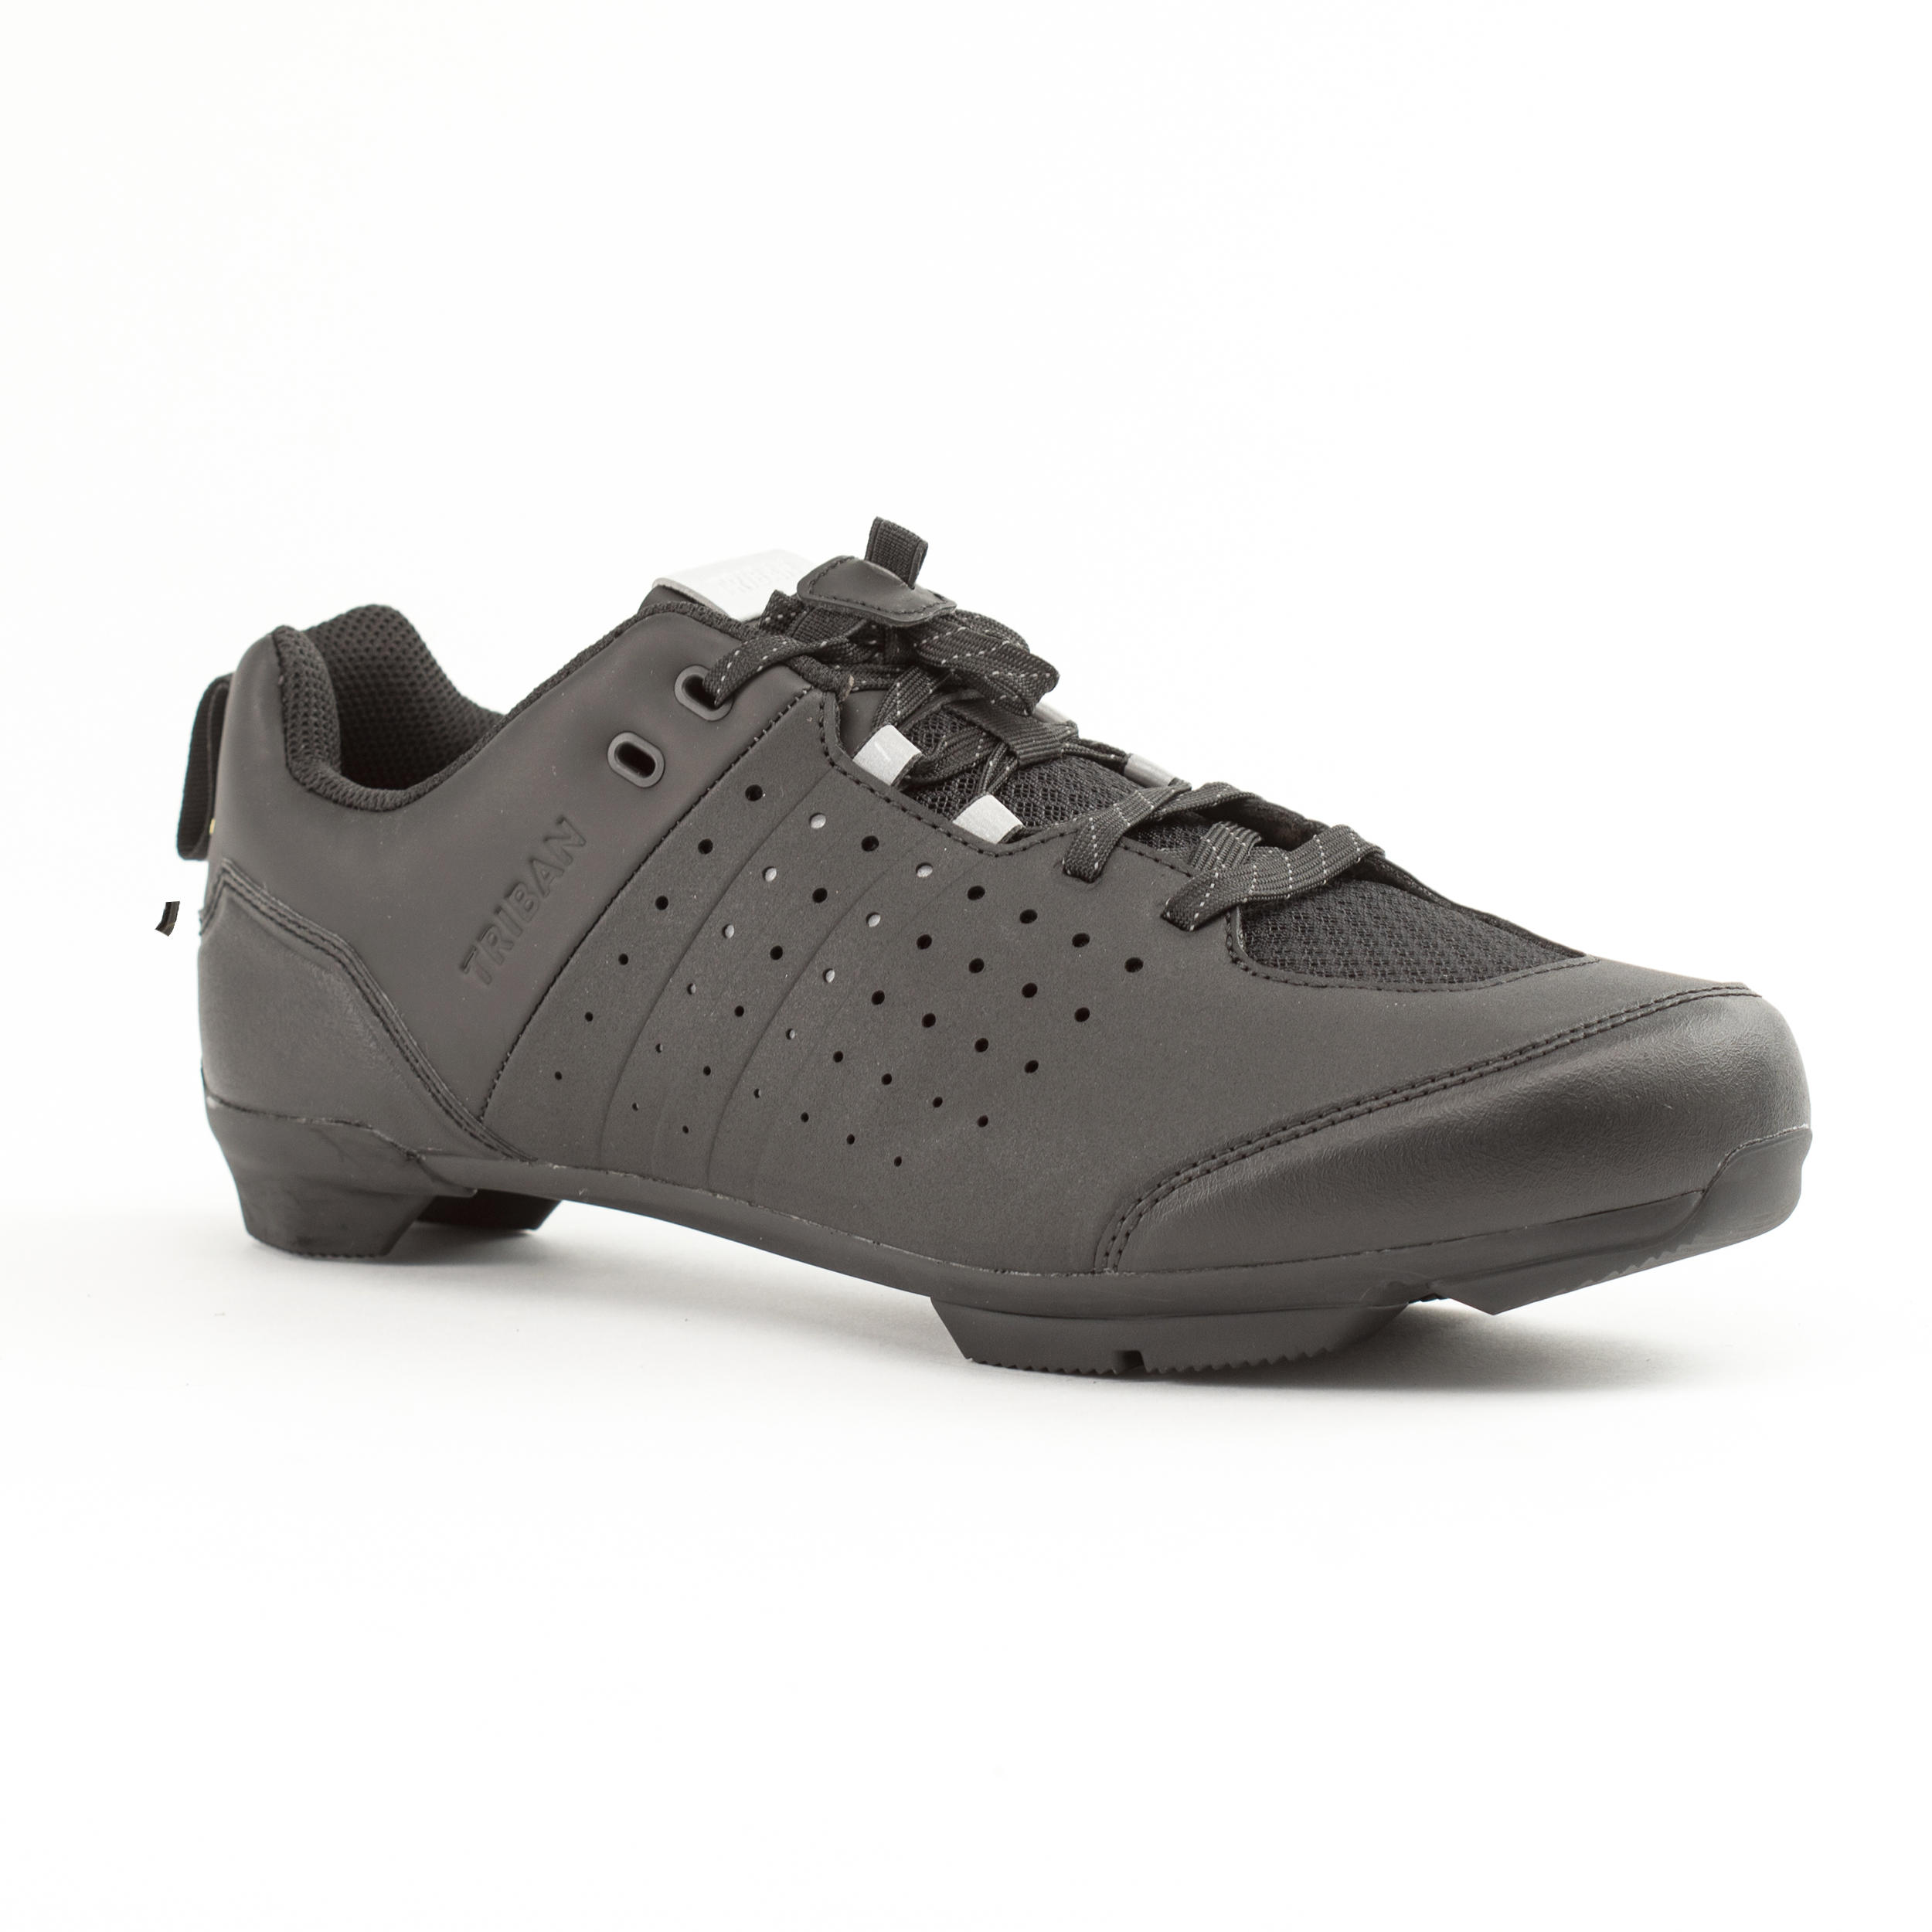 road bike shoes with spd cleats